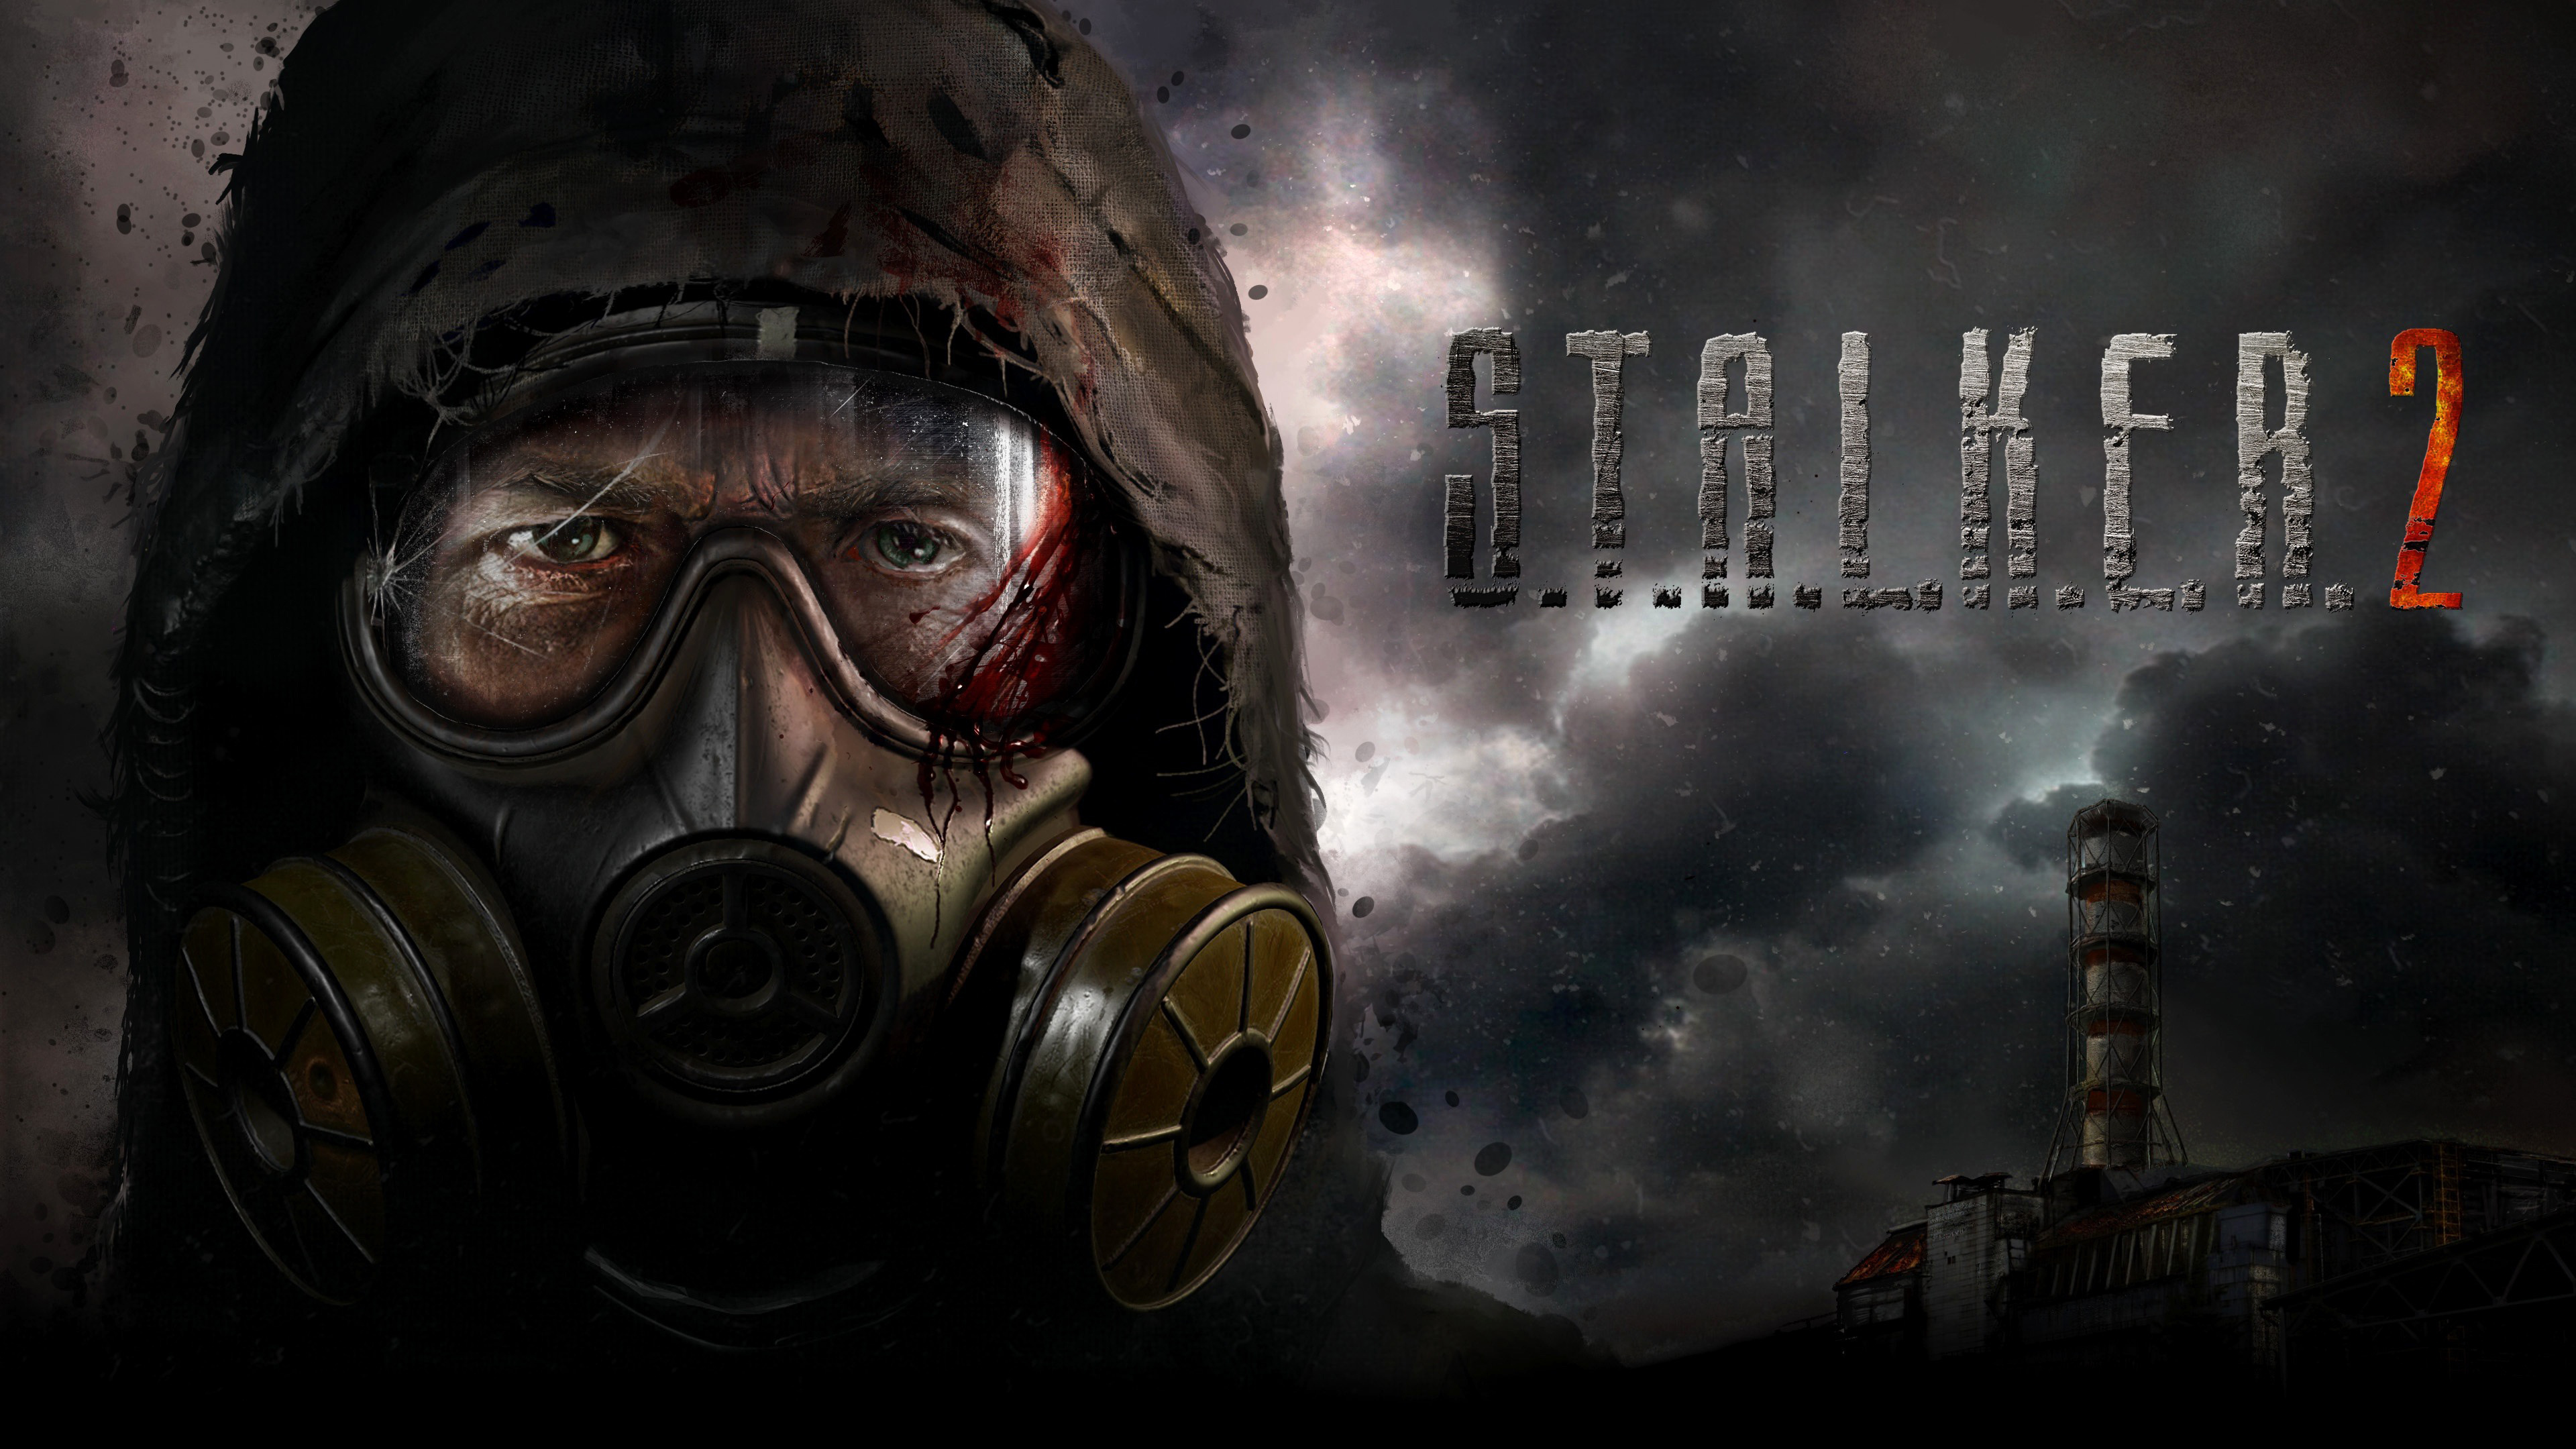 S.T.A.L.K.E.R. 2: Heart of Chornobyl, GSC Game World, The next installment after Call of Pripyat. 3840x2160 4K Background.